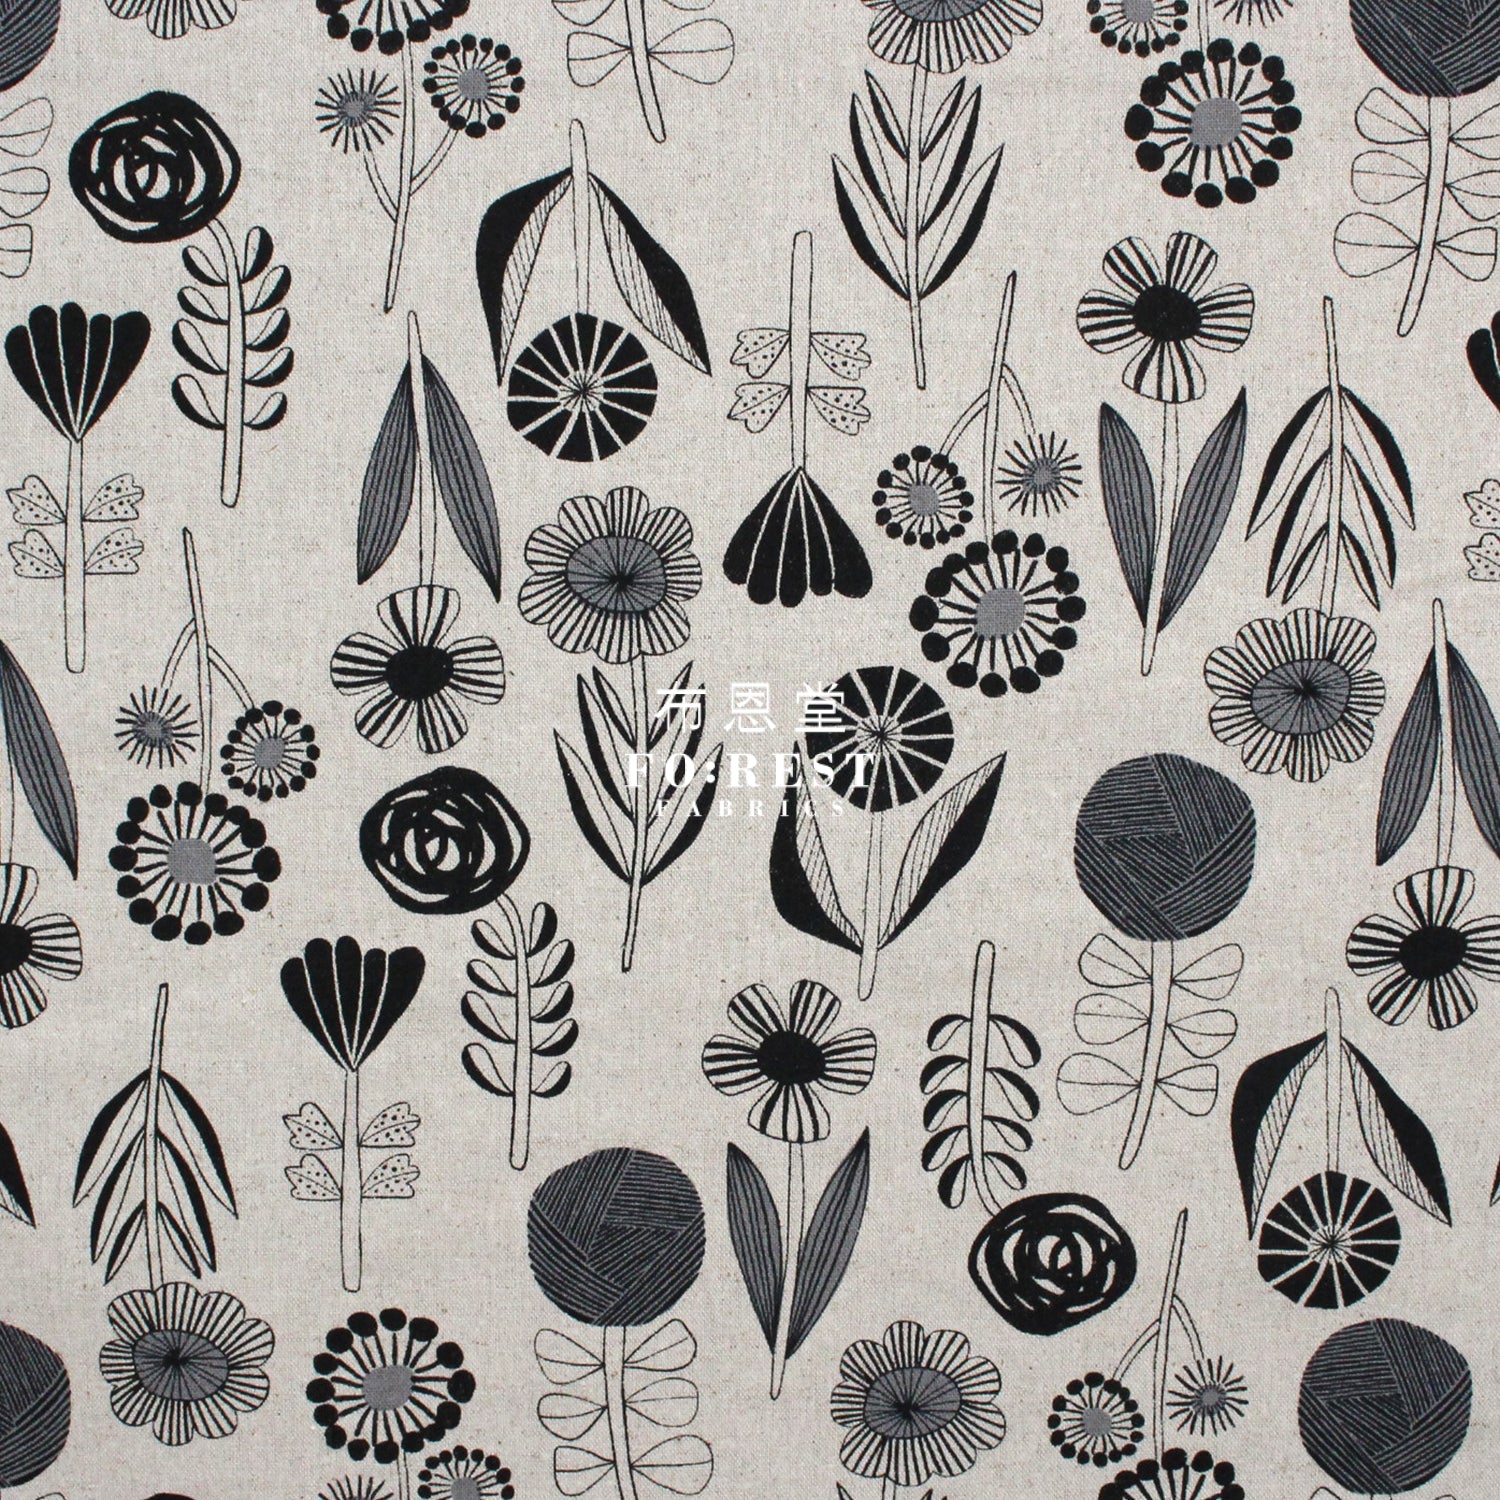 Cotton Linen - Bloom By Bookhou Flower Fabric B Fabric